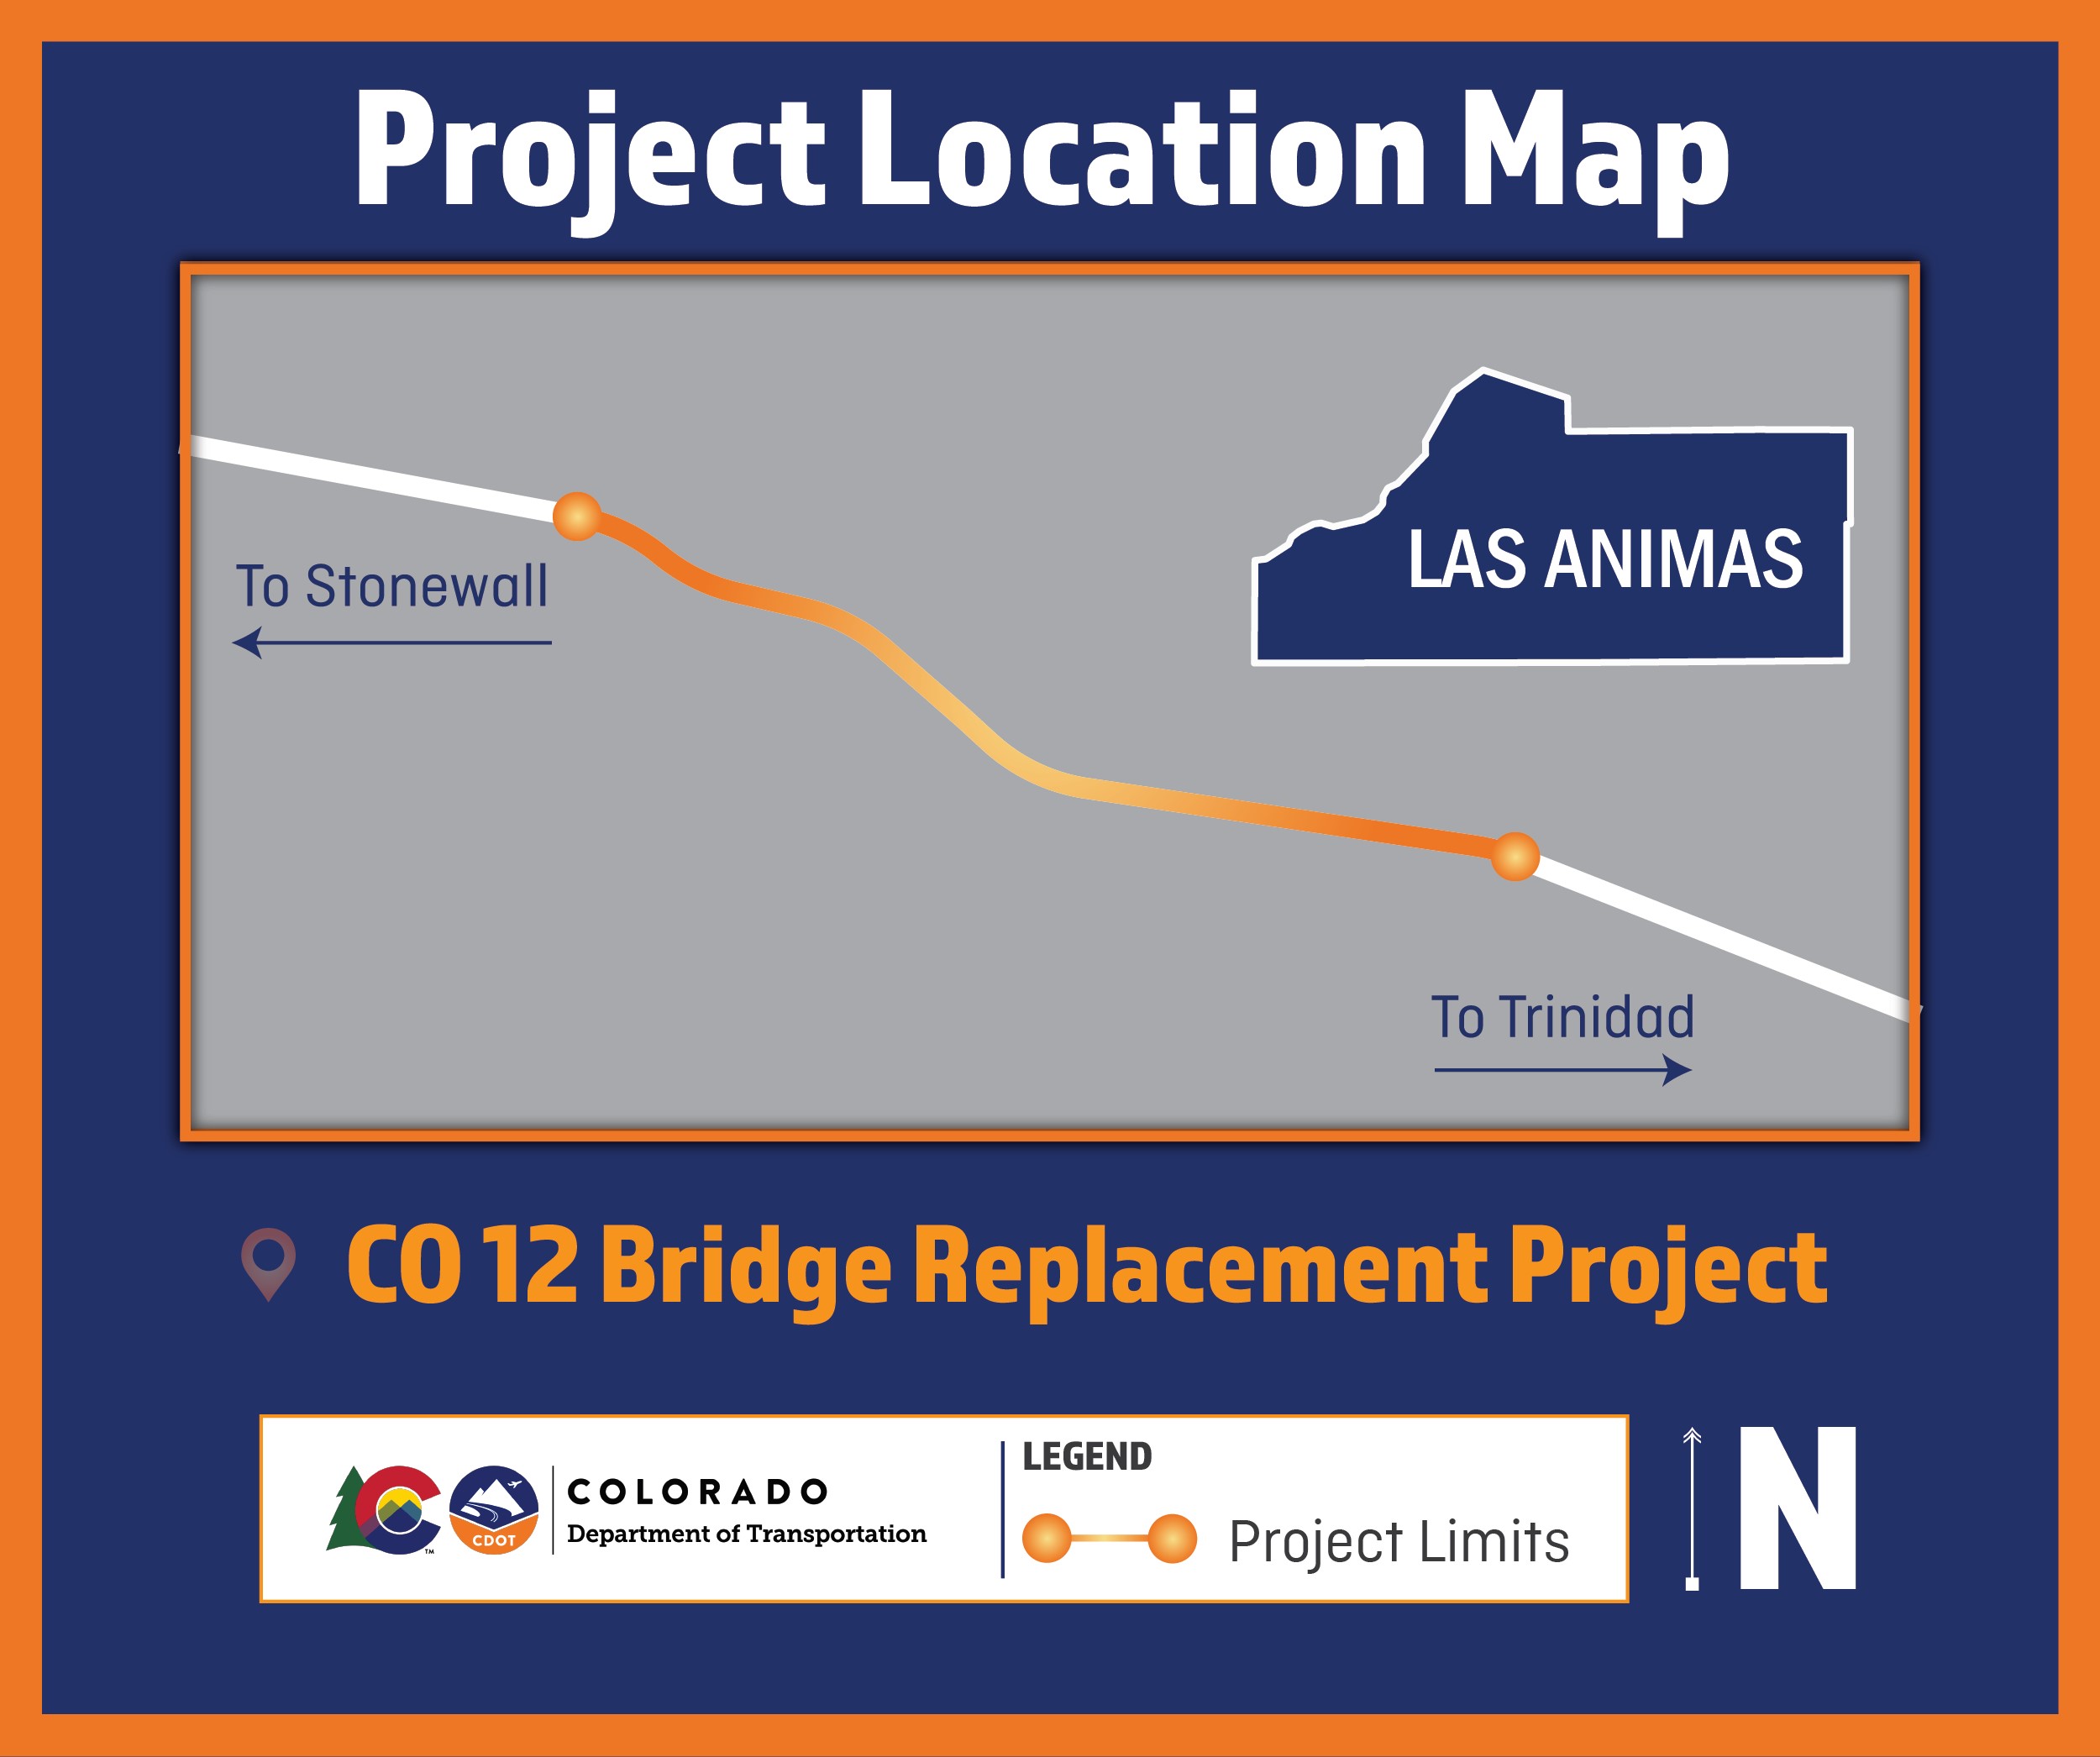 CO 12 Bridge Replacement Project Location Map v1 3.16.23-01.jpeg detail image